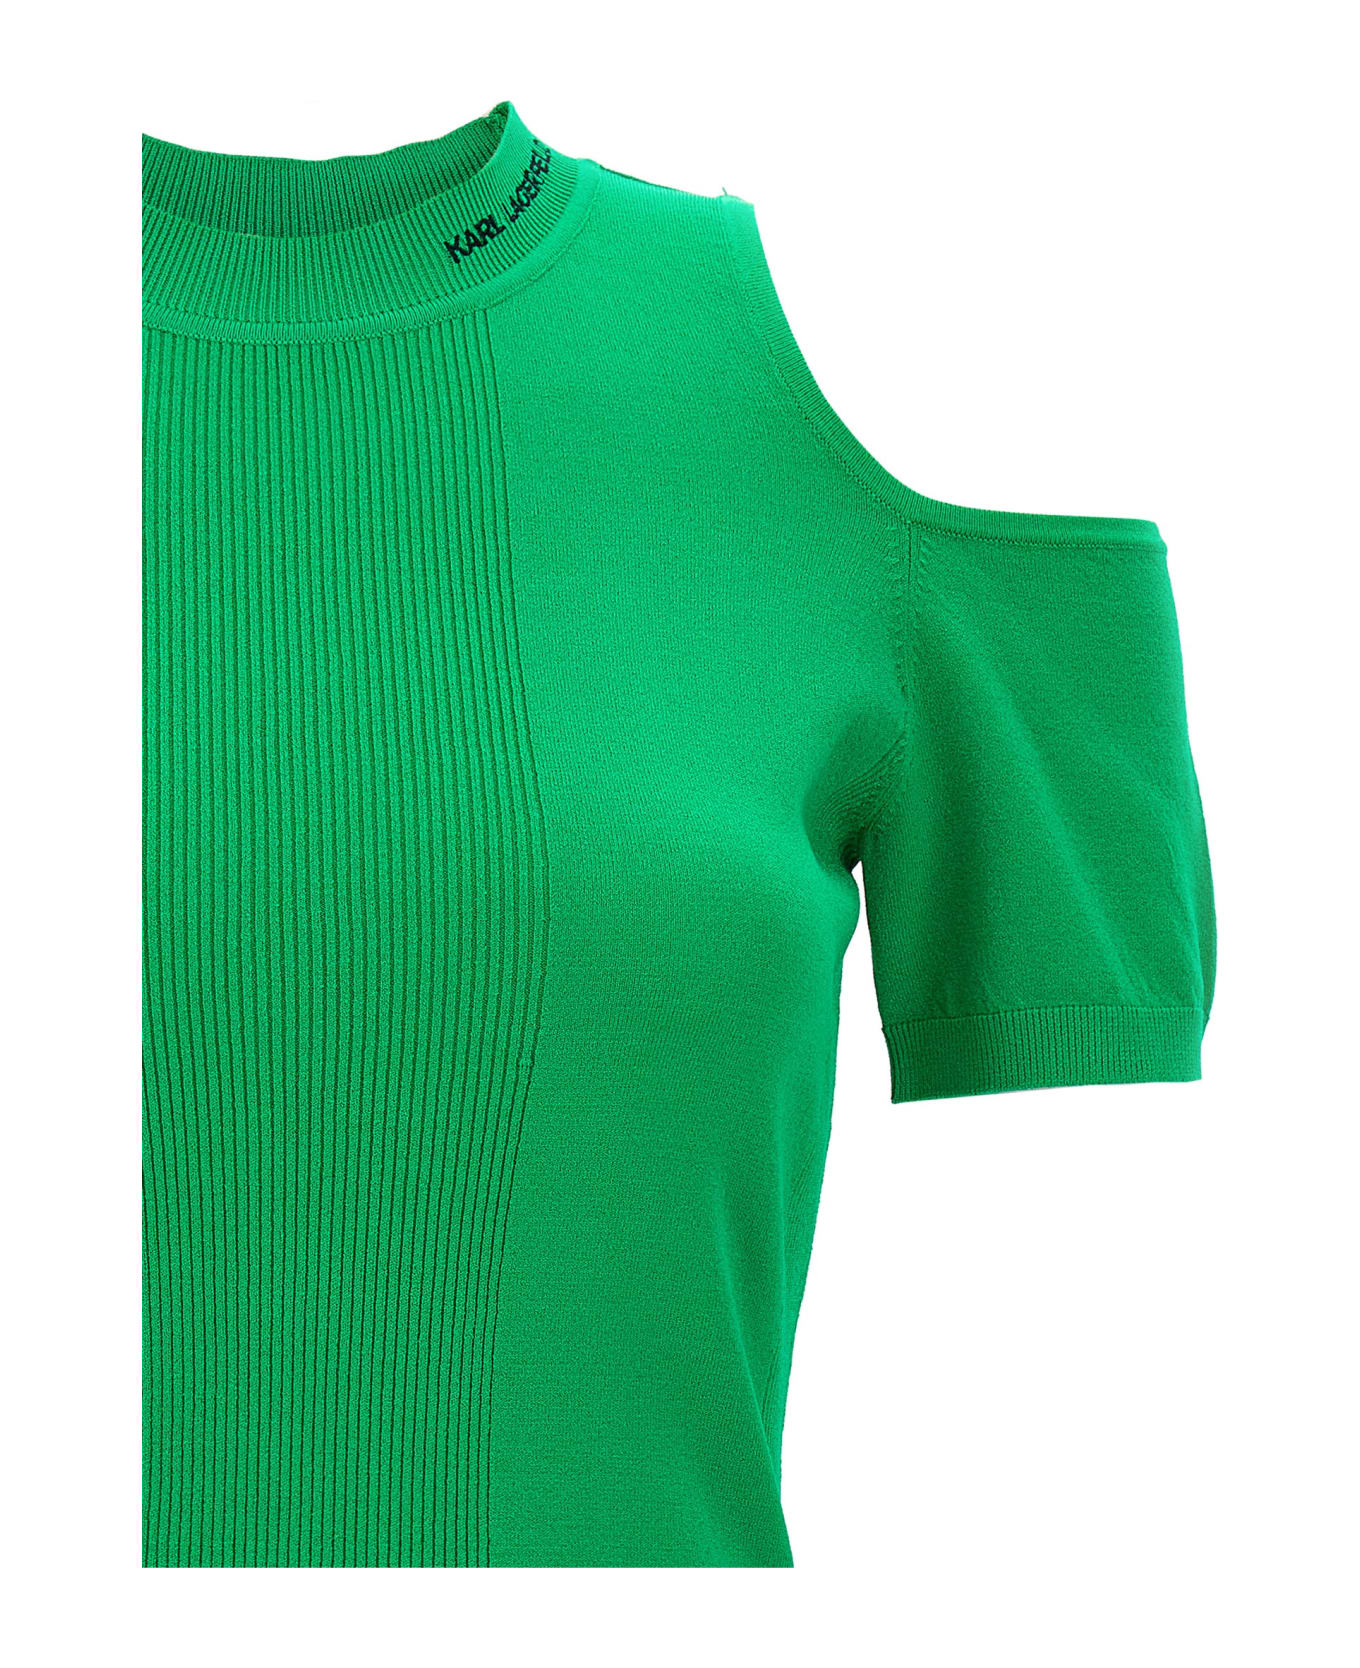 Karl Lagerfeld Cut Out Top - Green